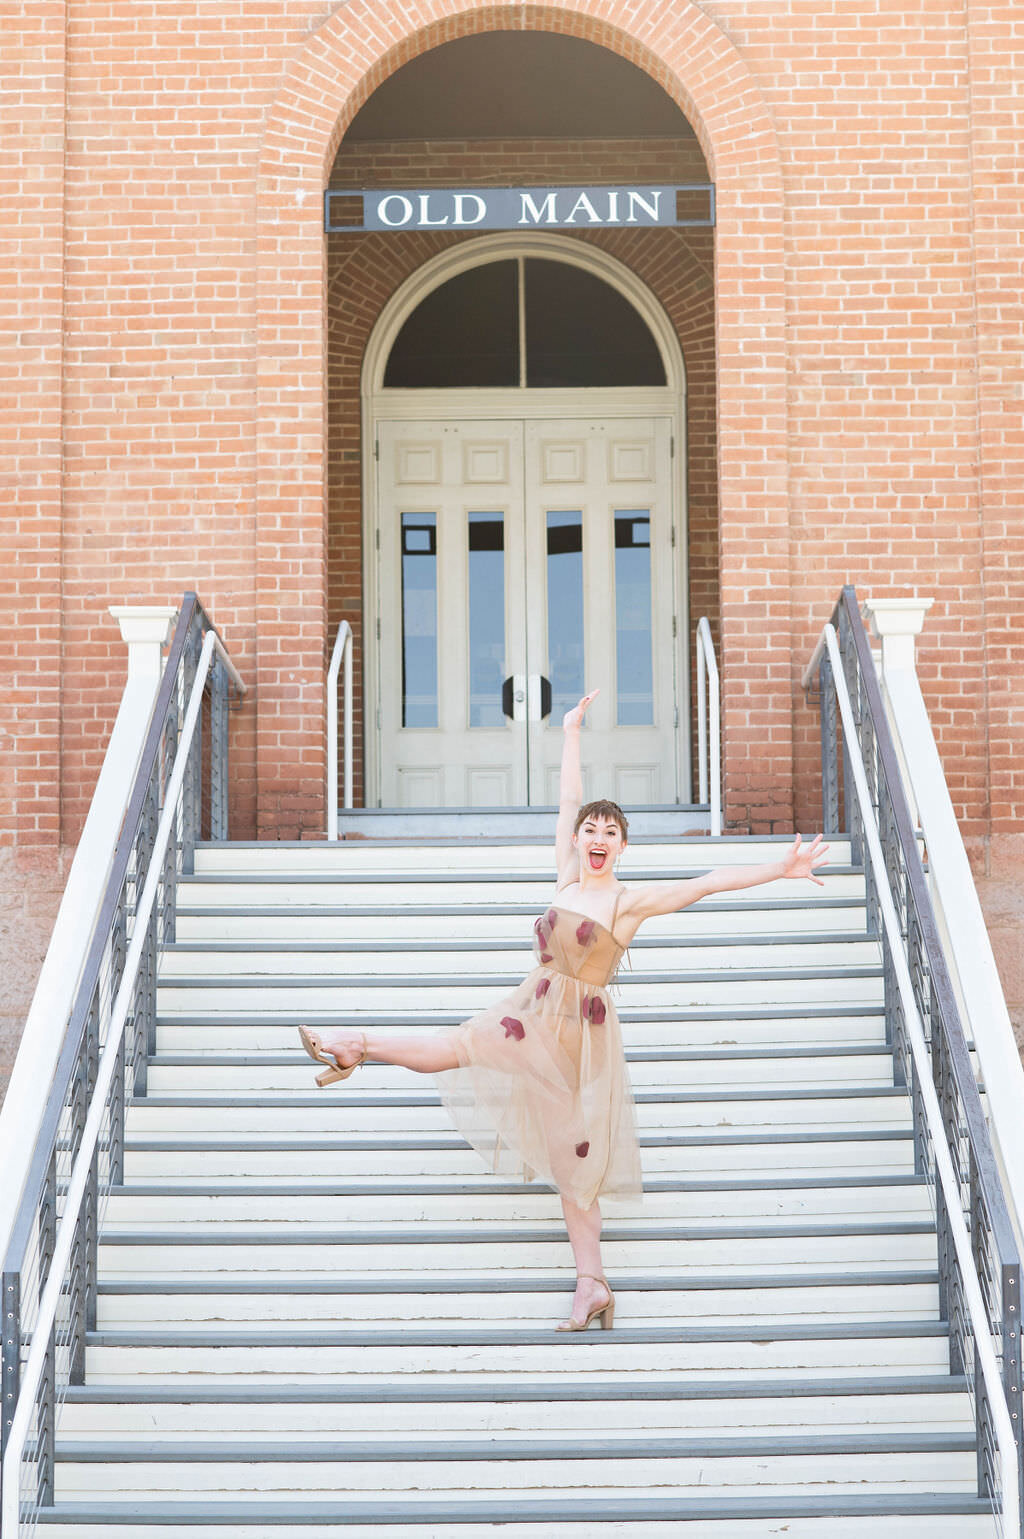 A girl with one leg kicked out and her arms outstretched while standing on a staircase.